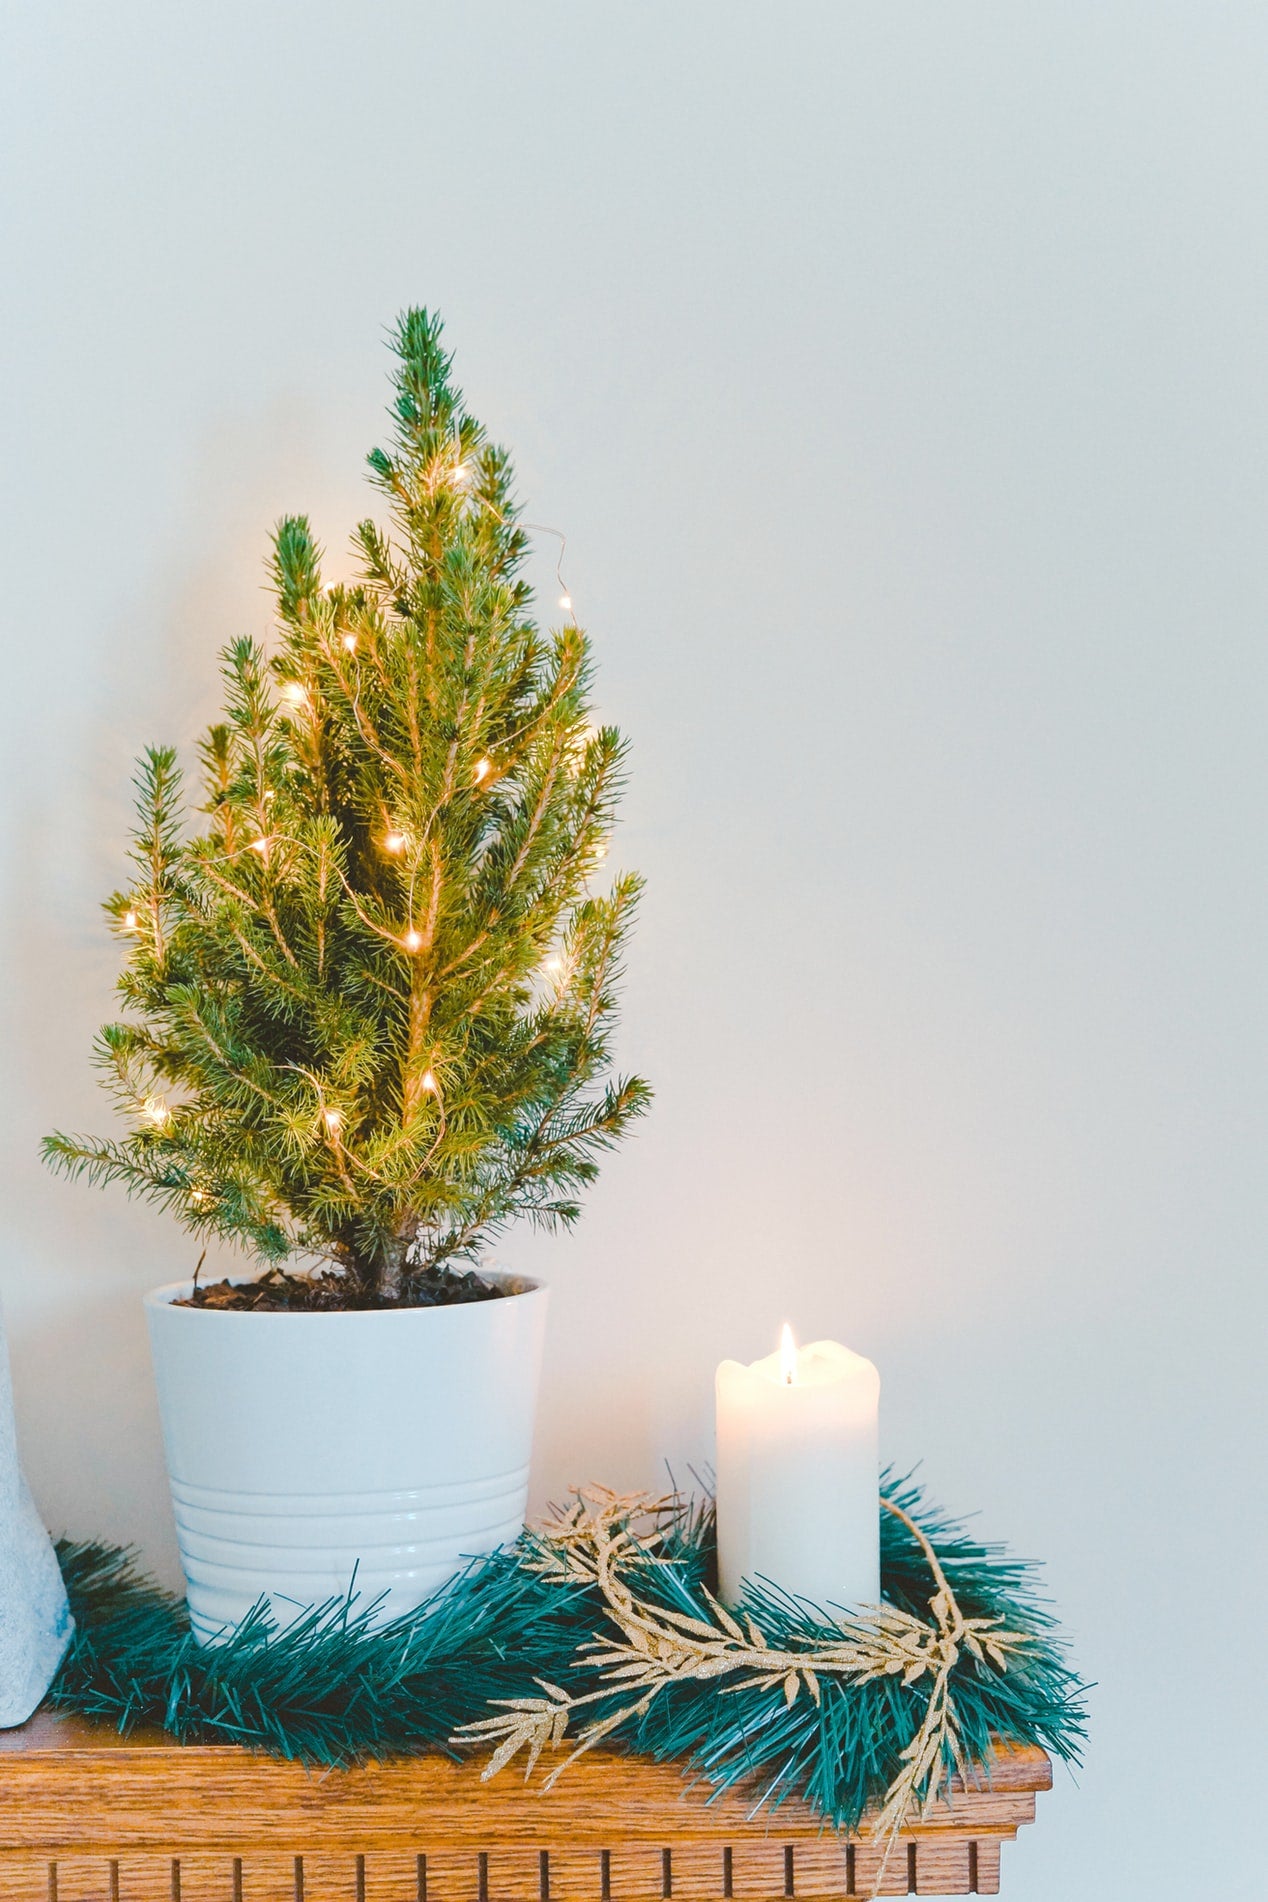 A small Christmas tree and candle create a festive atmosphere on the mantle when getting your home ready for the holidays. 